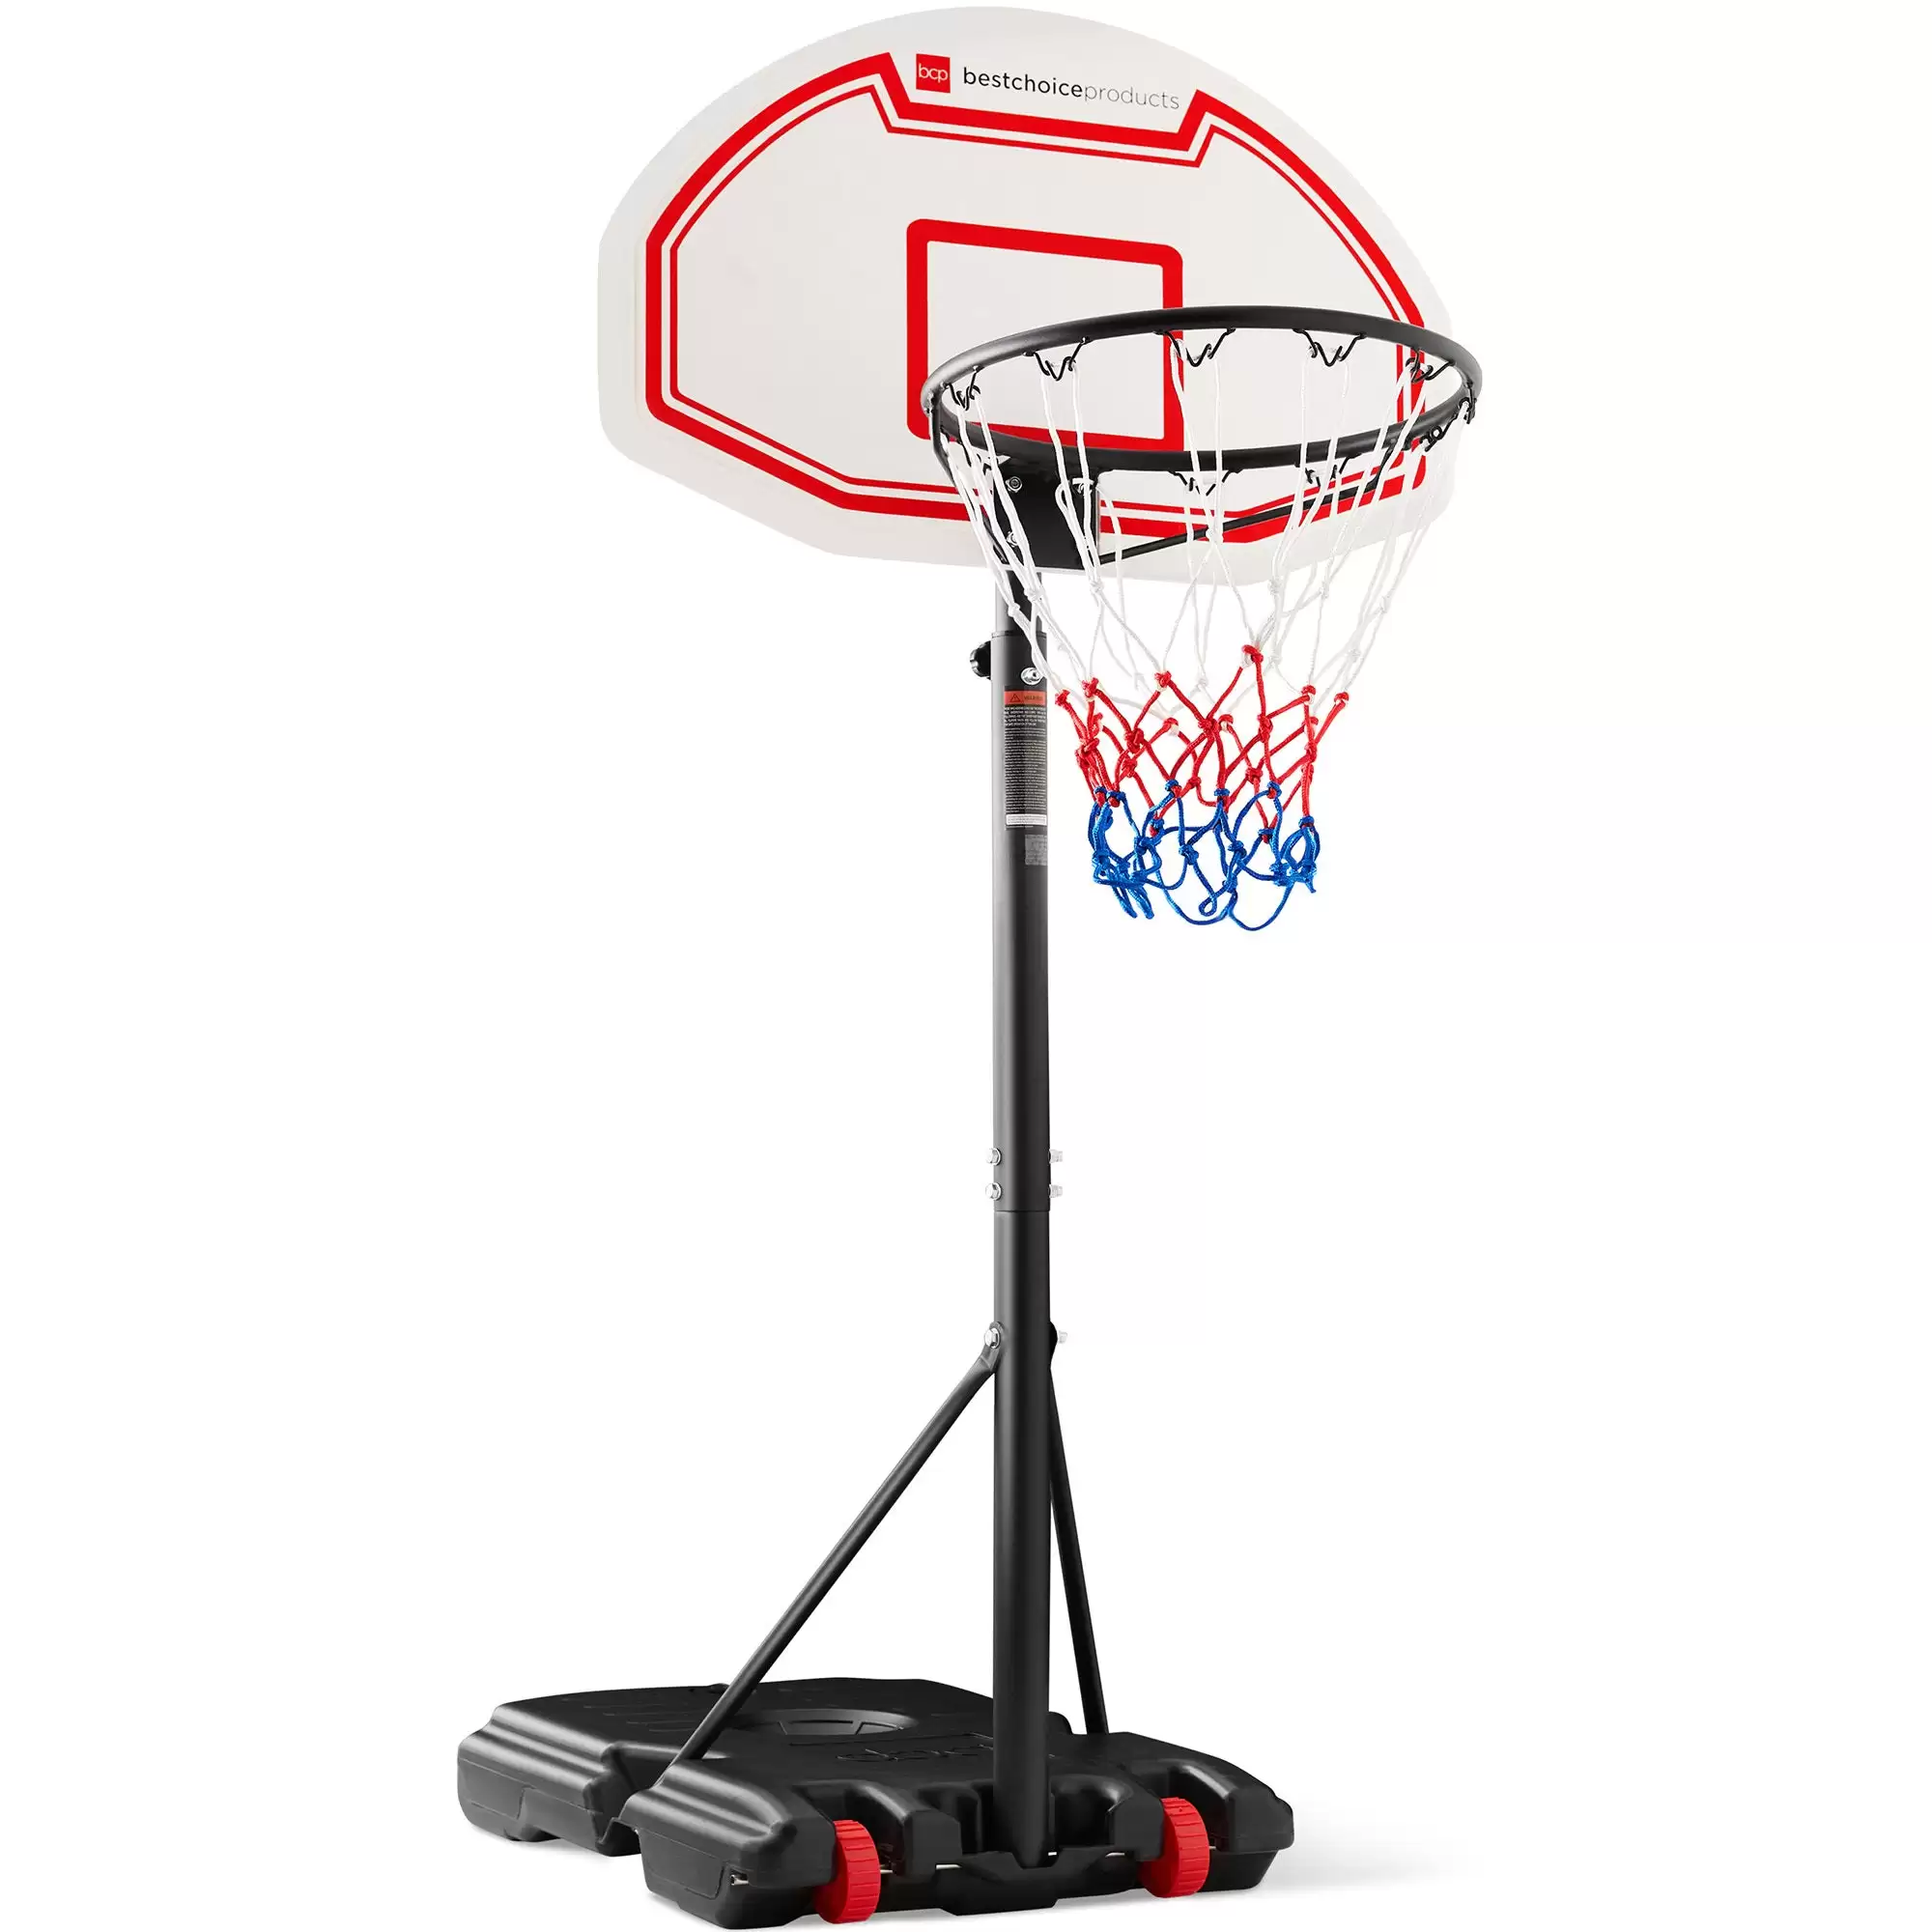 Pay $74.98 Kids Height-adjustable Basketball Hoop, Portable Backboard System W/ Wheels At Bestchoiceproducts